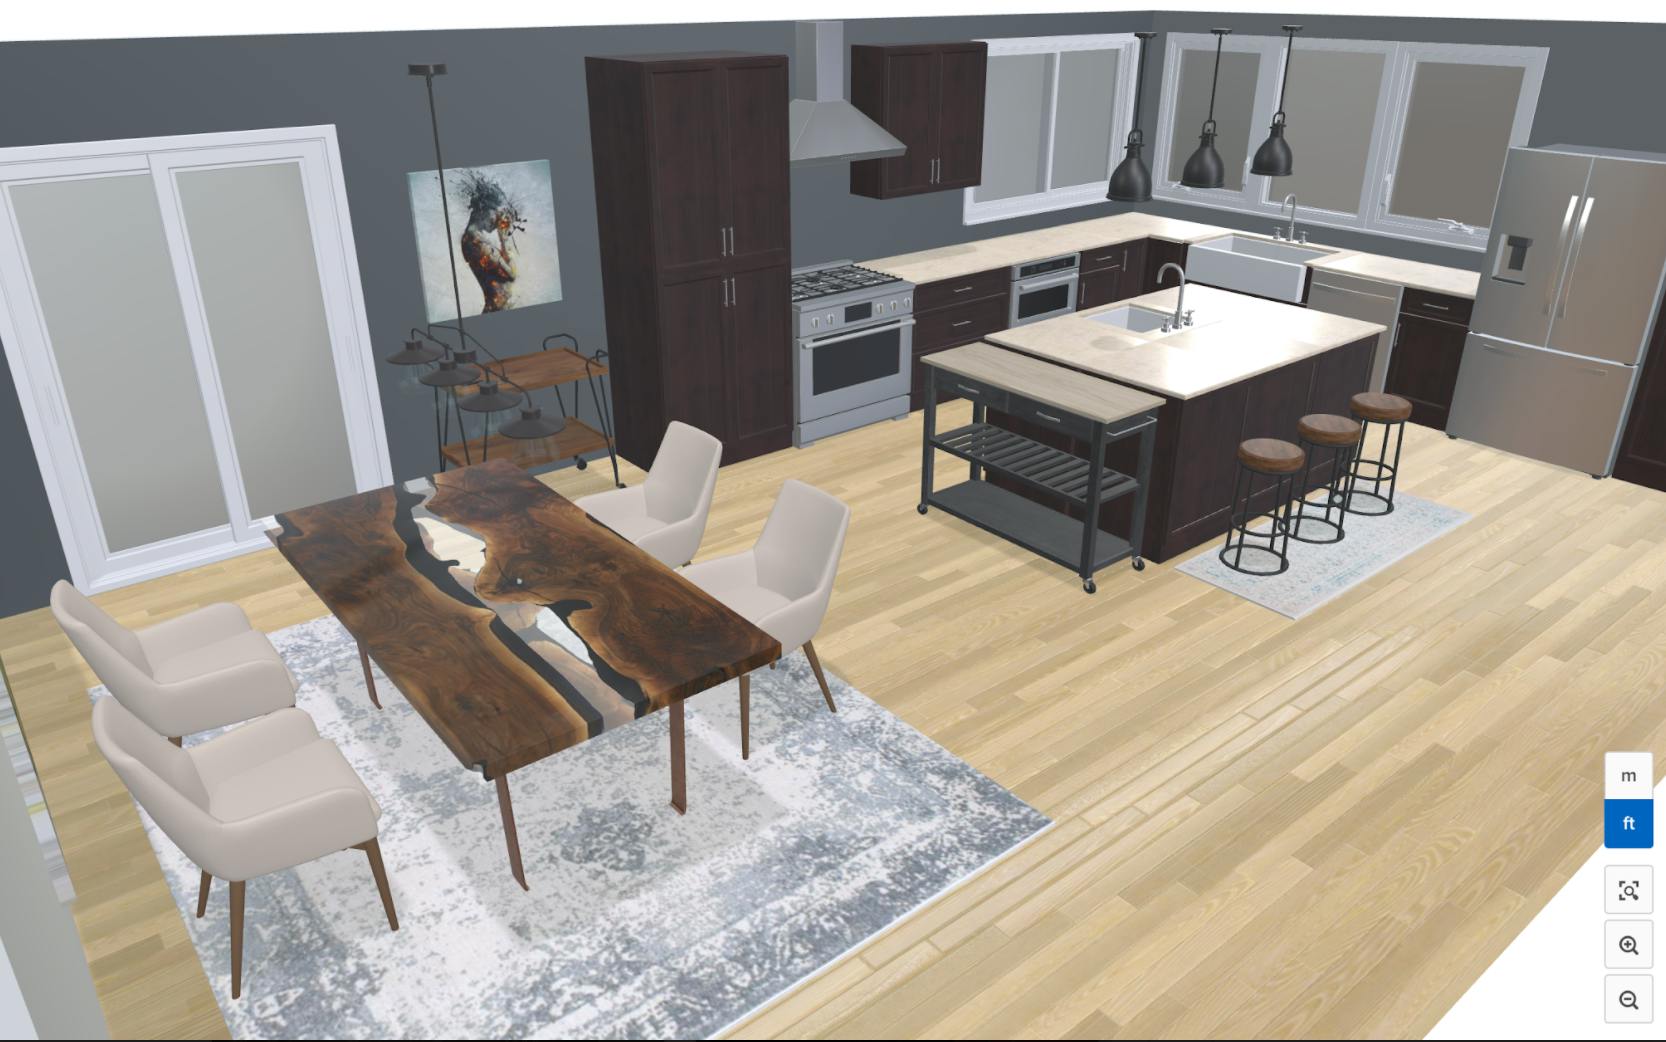 Houzz Pro floor planner makes amazing 2D and 3D floor plans. Check out that kitchen remodel! 